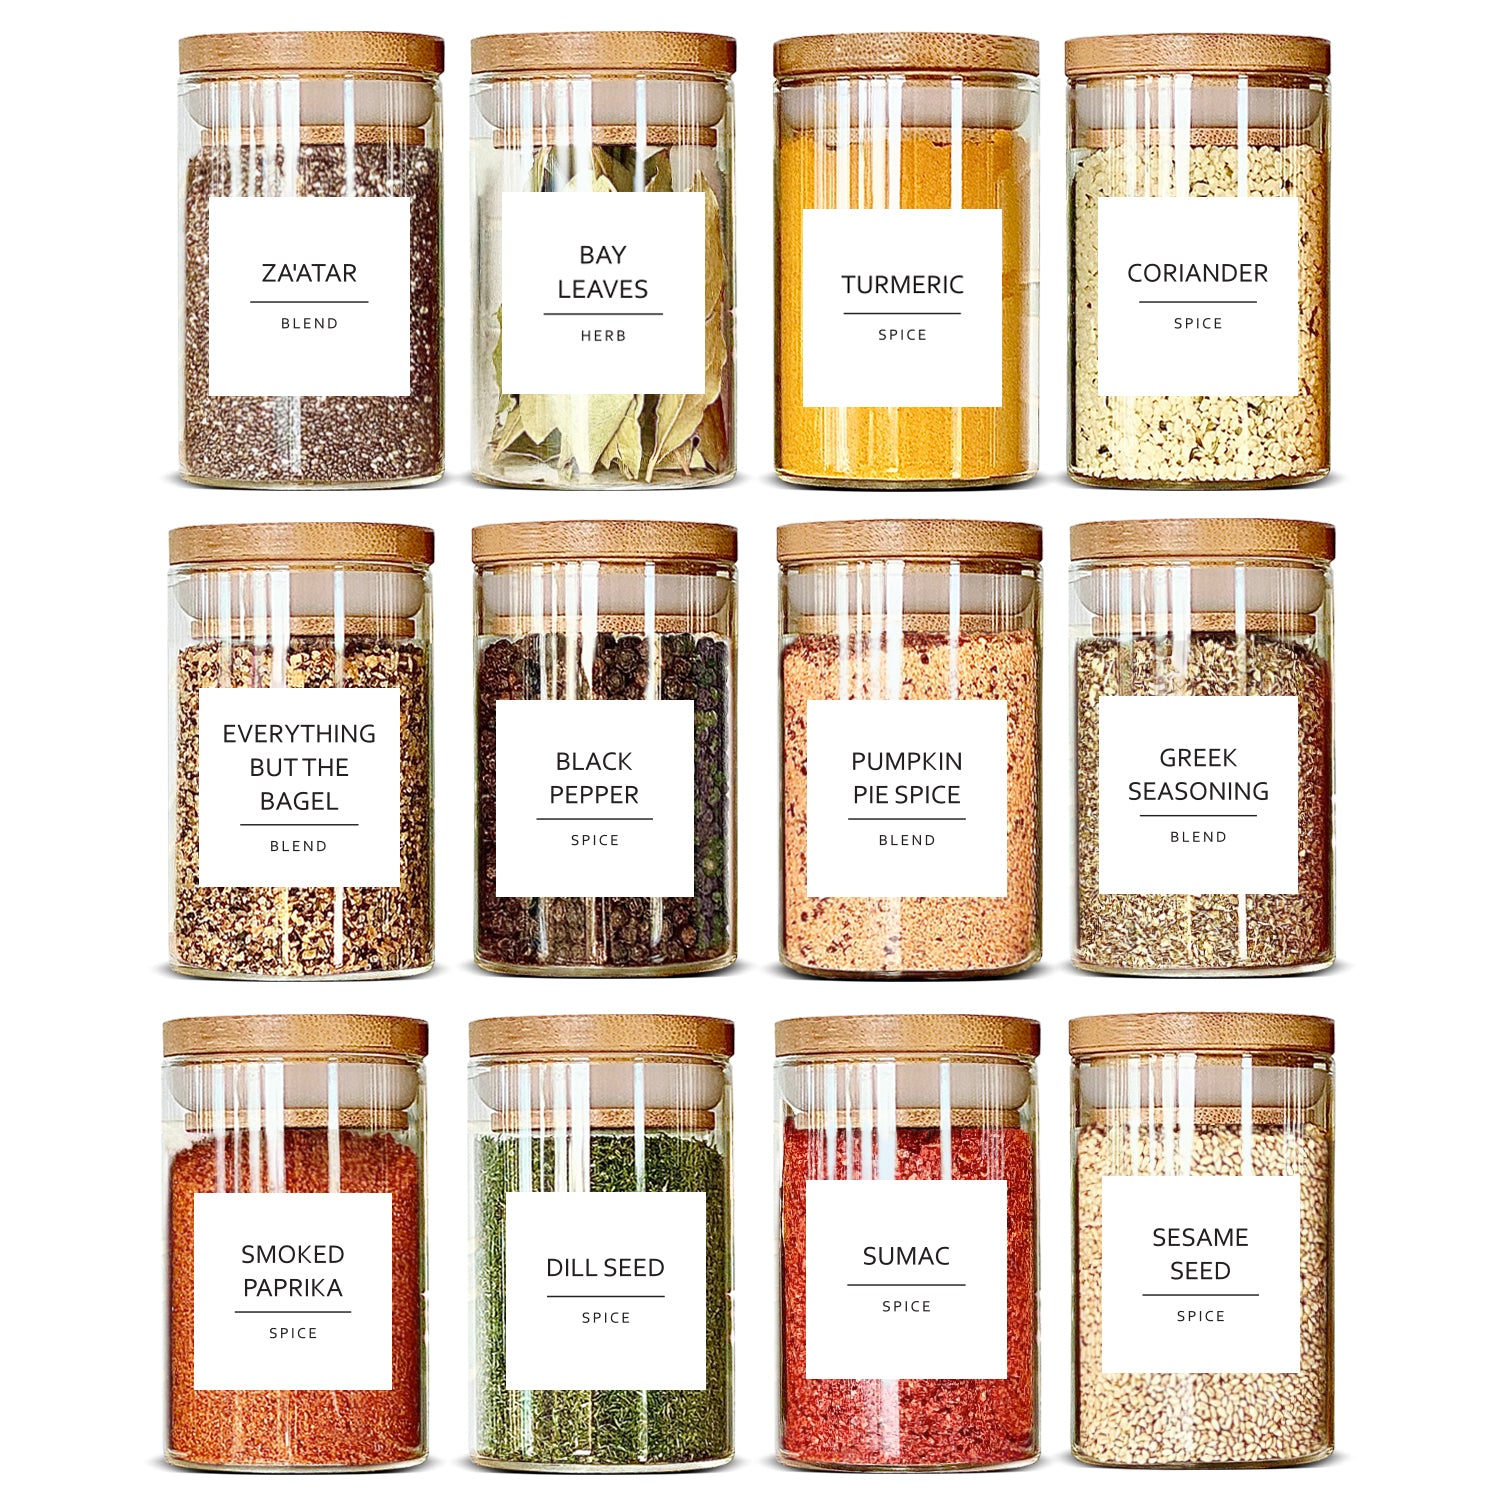 Talented Kitchen 300 Preprinted Spice Labels, Clear Spice Jar Labels For  Seasoning, Herbs, Pantry And Kitchen Spice Rack Organization, Black And  White Cursive Font